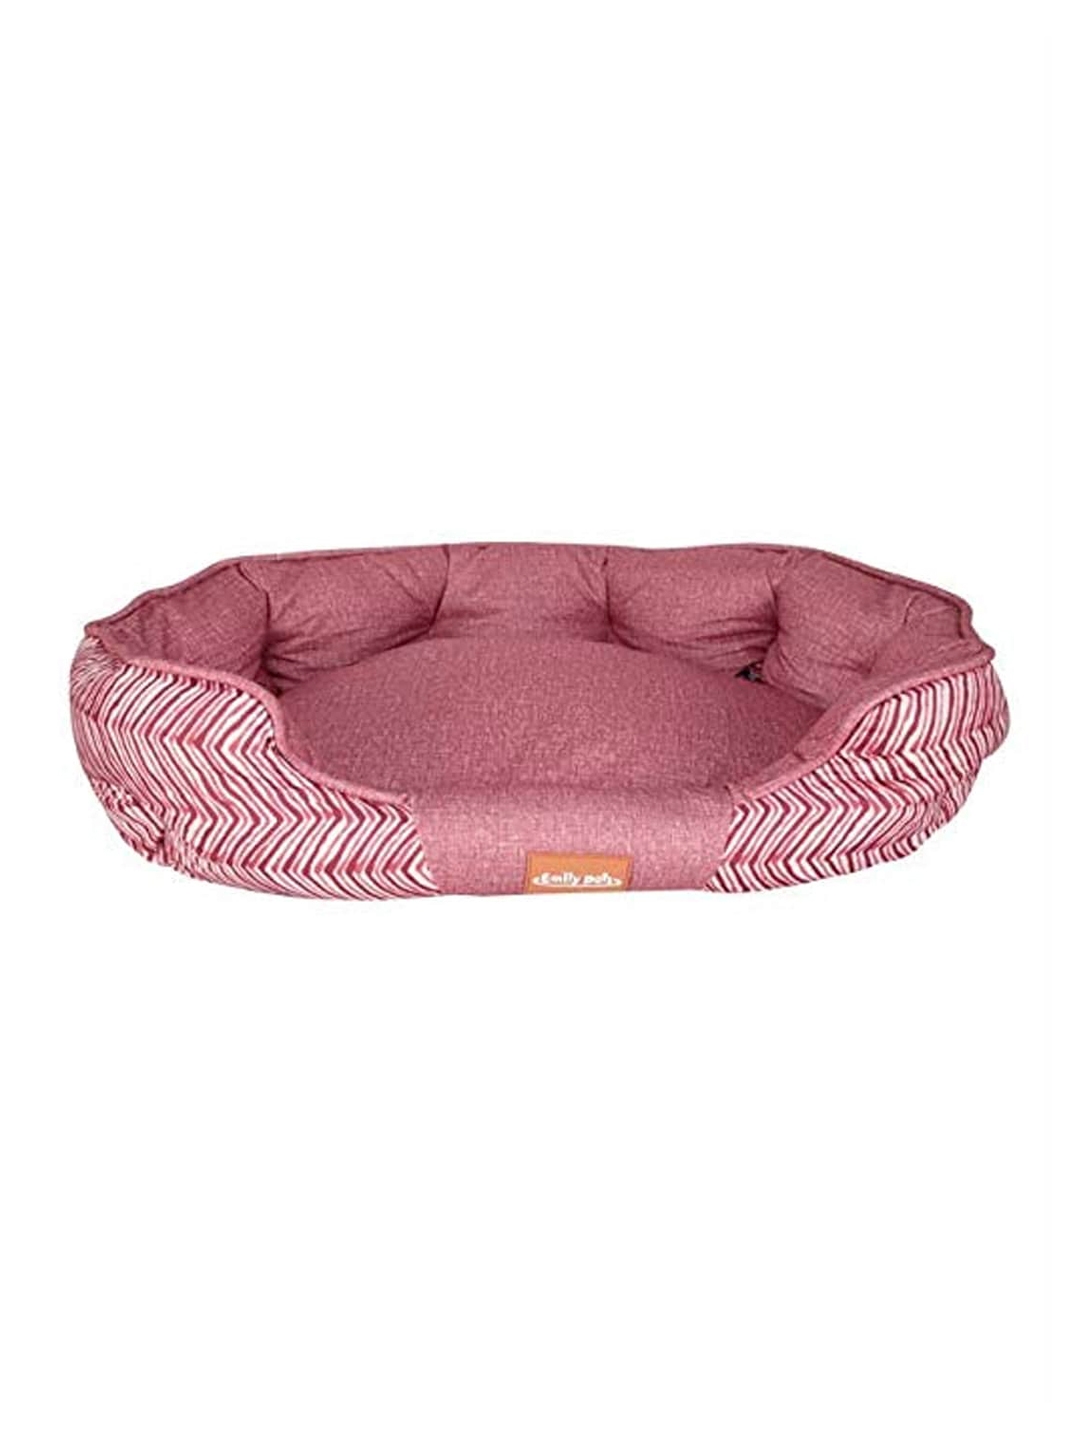 Emily Pets Red Printed Self Warming Pet Bed